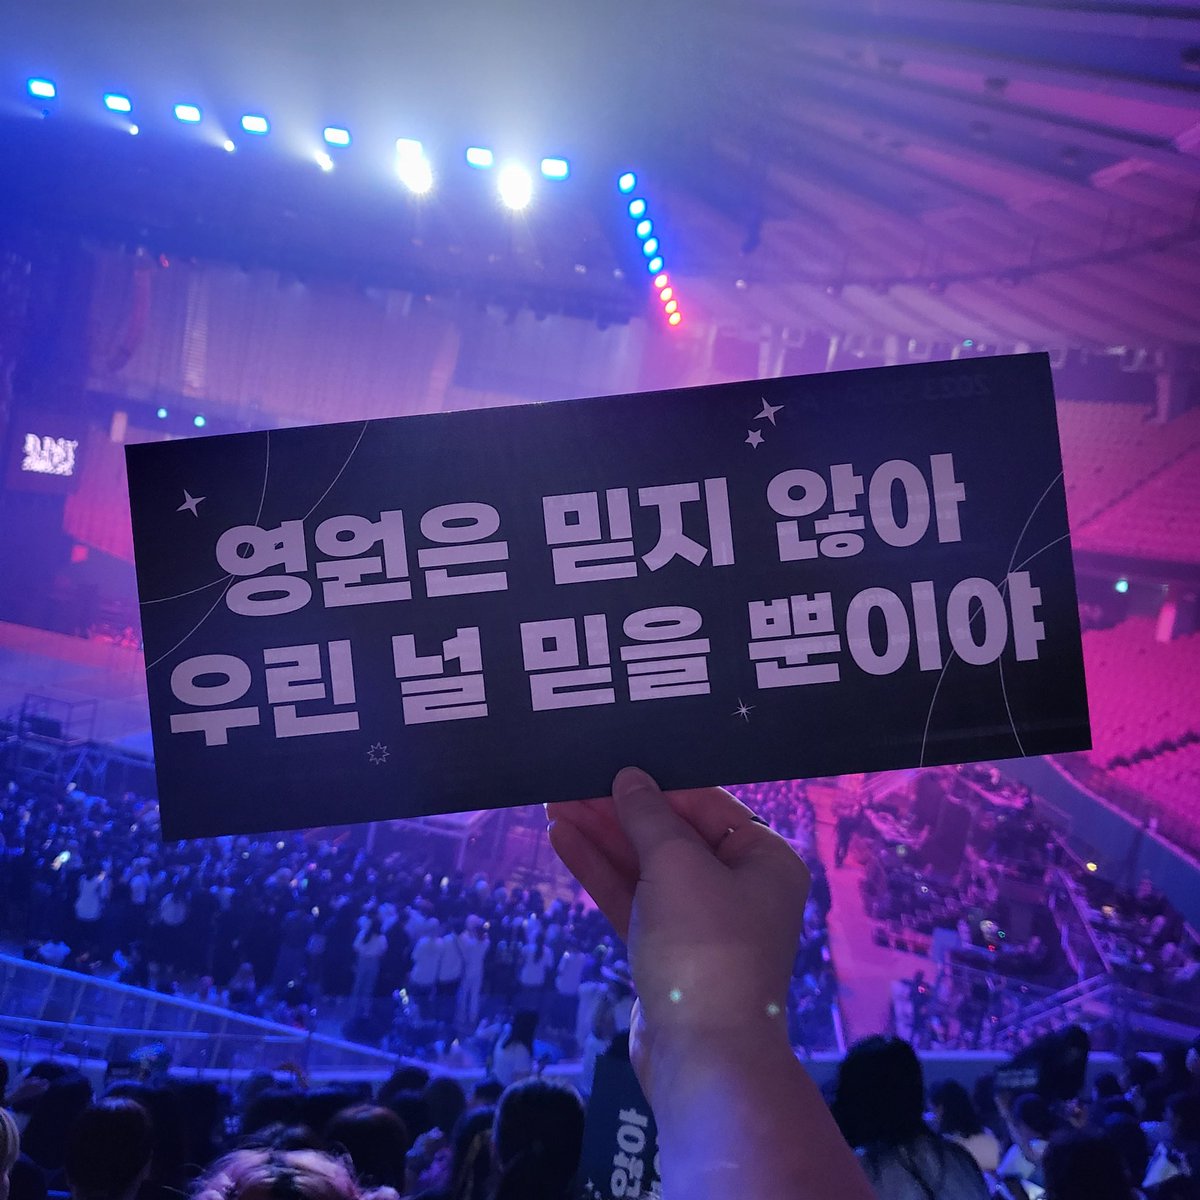 'I don't believe in eternity, we only believe in you' . The official banner 🎫  🐈💜🏟️🥢💮🙆🏻‍♀️ #SUGA #AgustD #슈가 #D_DAY 
#AgustD_Suga_Tour_in_Seoul 
#SUGA_AgustD_Tour_in_Seoul #D_DAY_TOUR_D24 
#SUGA_AgustD_TOUR 
#AgustD_SUGA_Tour #D_DAY_TOUR_SEOUL
#D_DAY_TOUR_SEOUL_D1 @BTS_twt